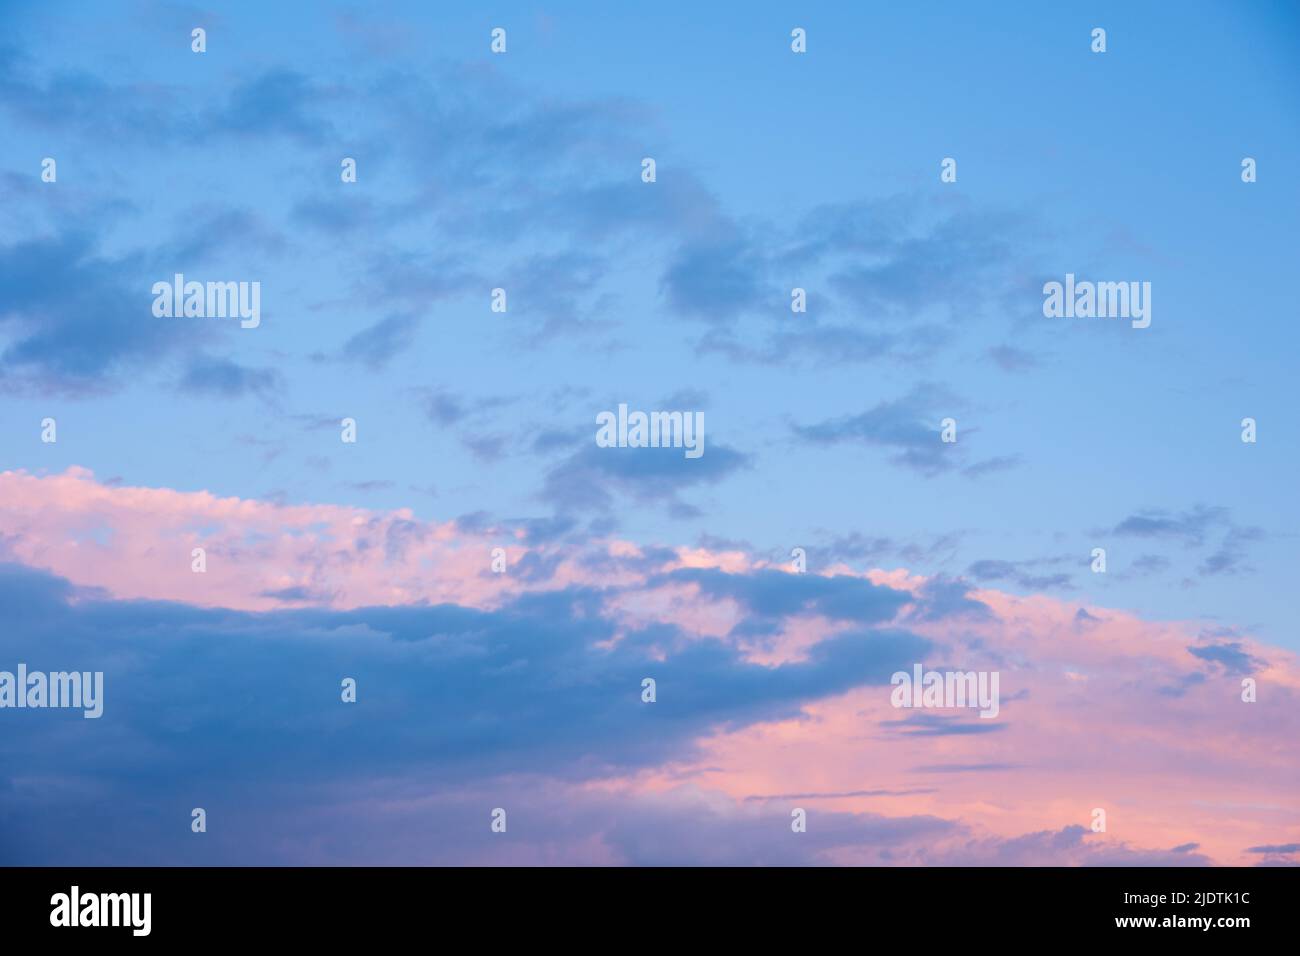 Abstract pink sunset sky and dark blue clouds background with motion ...